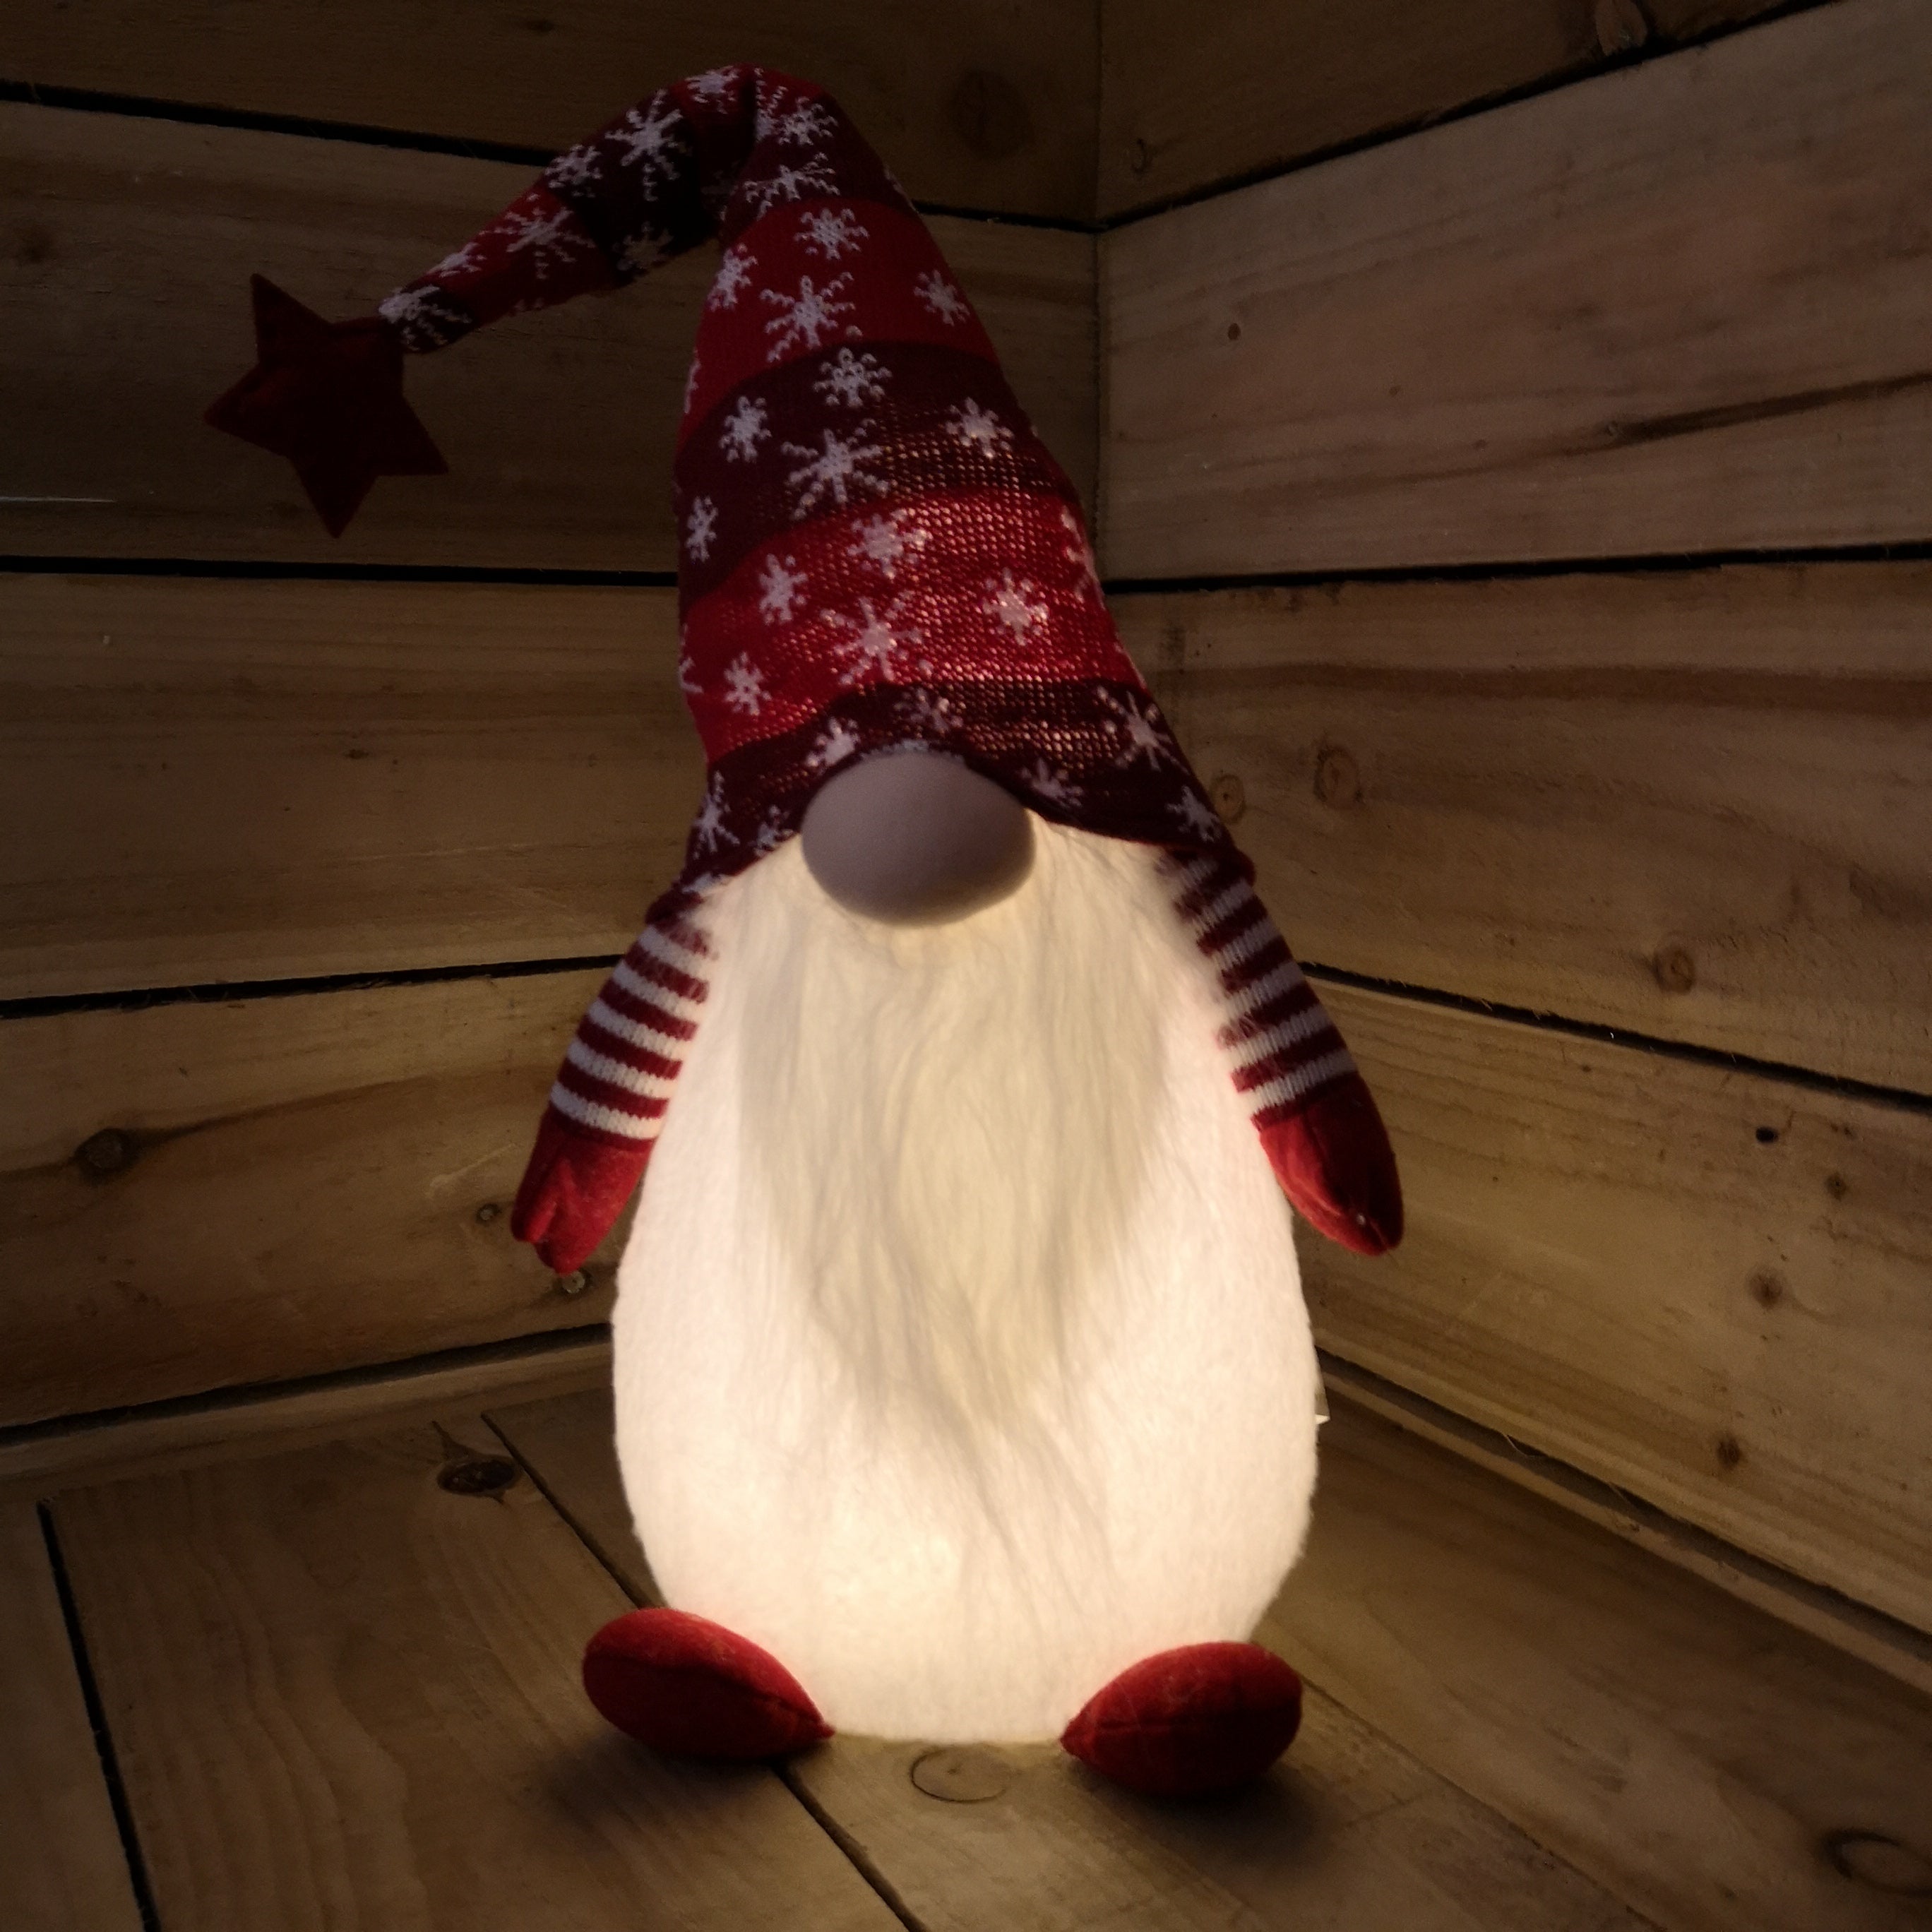 66cm Tall Light Up Christmas Gnome Gonk Decoration Red Snowflake Hat Sitting